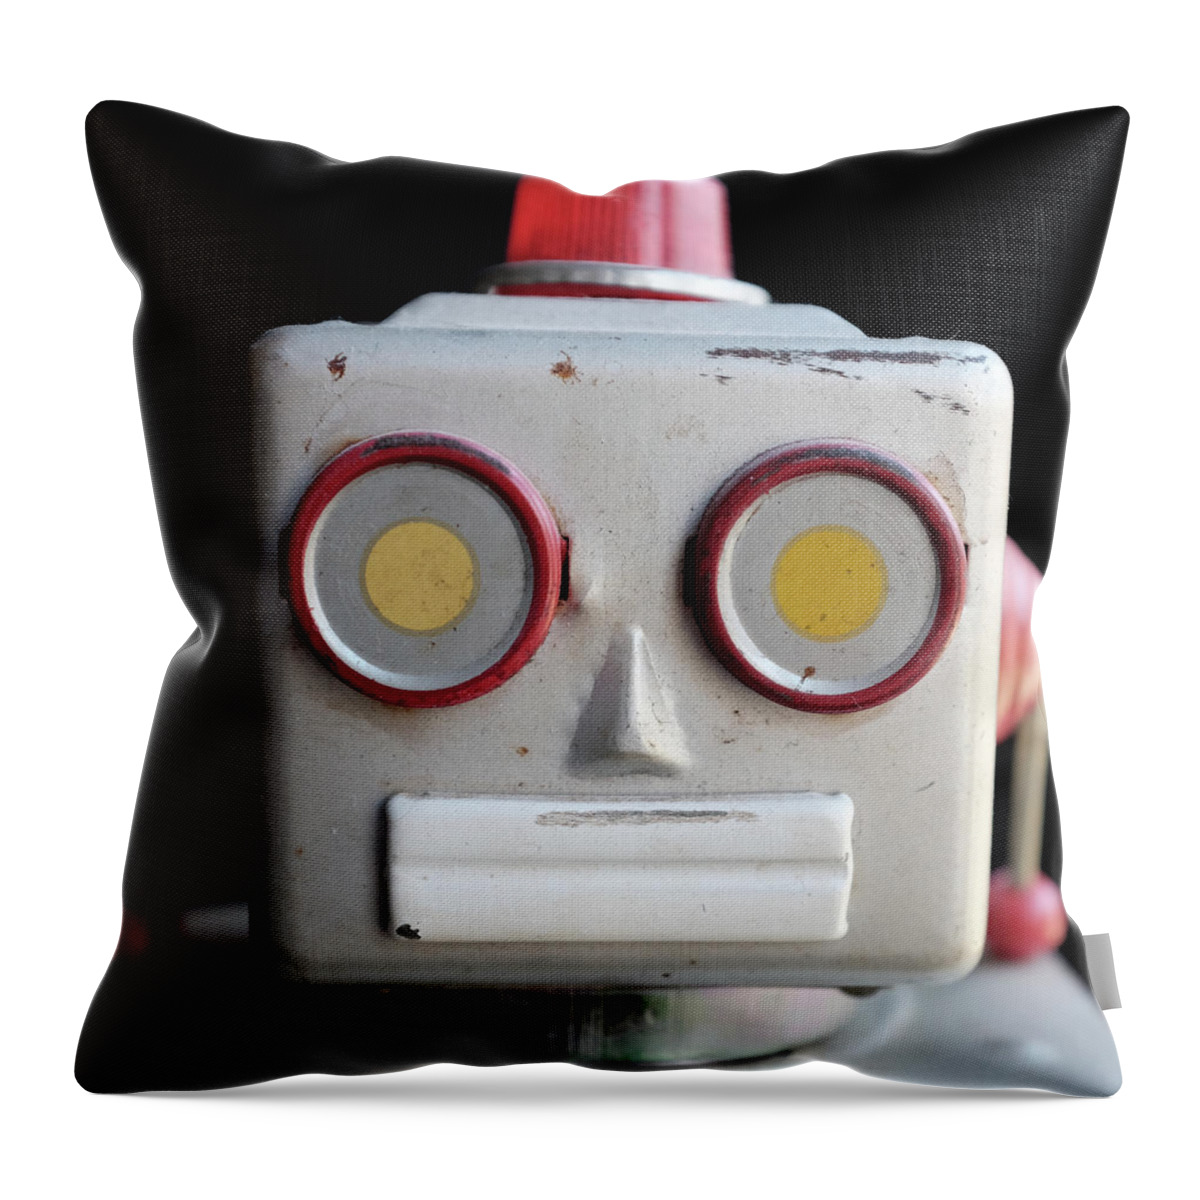 Robot Throw Pillow featuring the photograph Vintage Robot Square by Edward Fielding